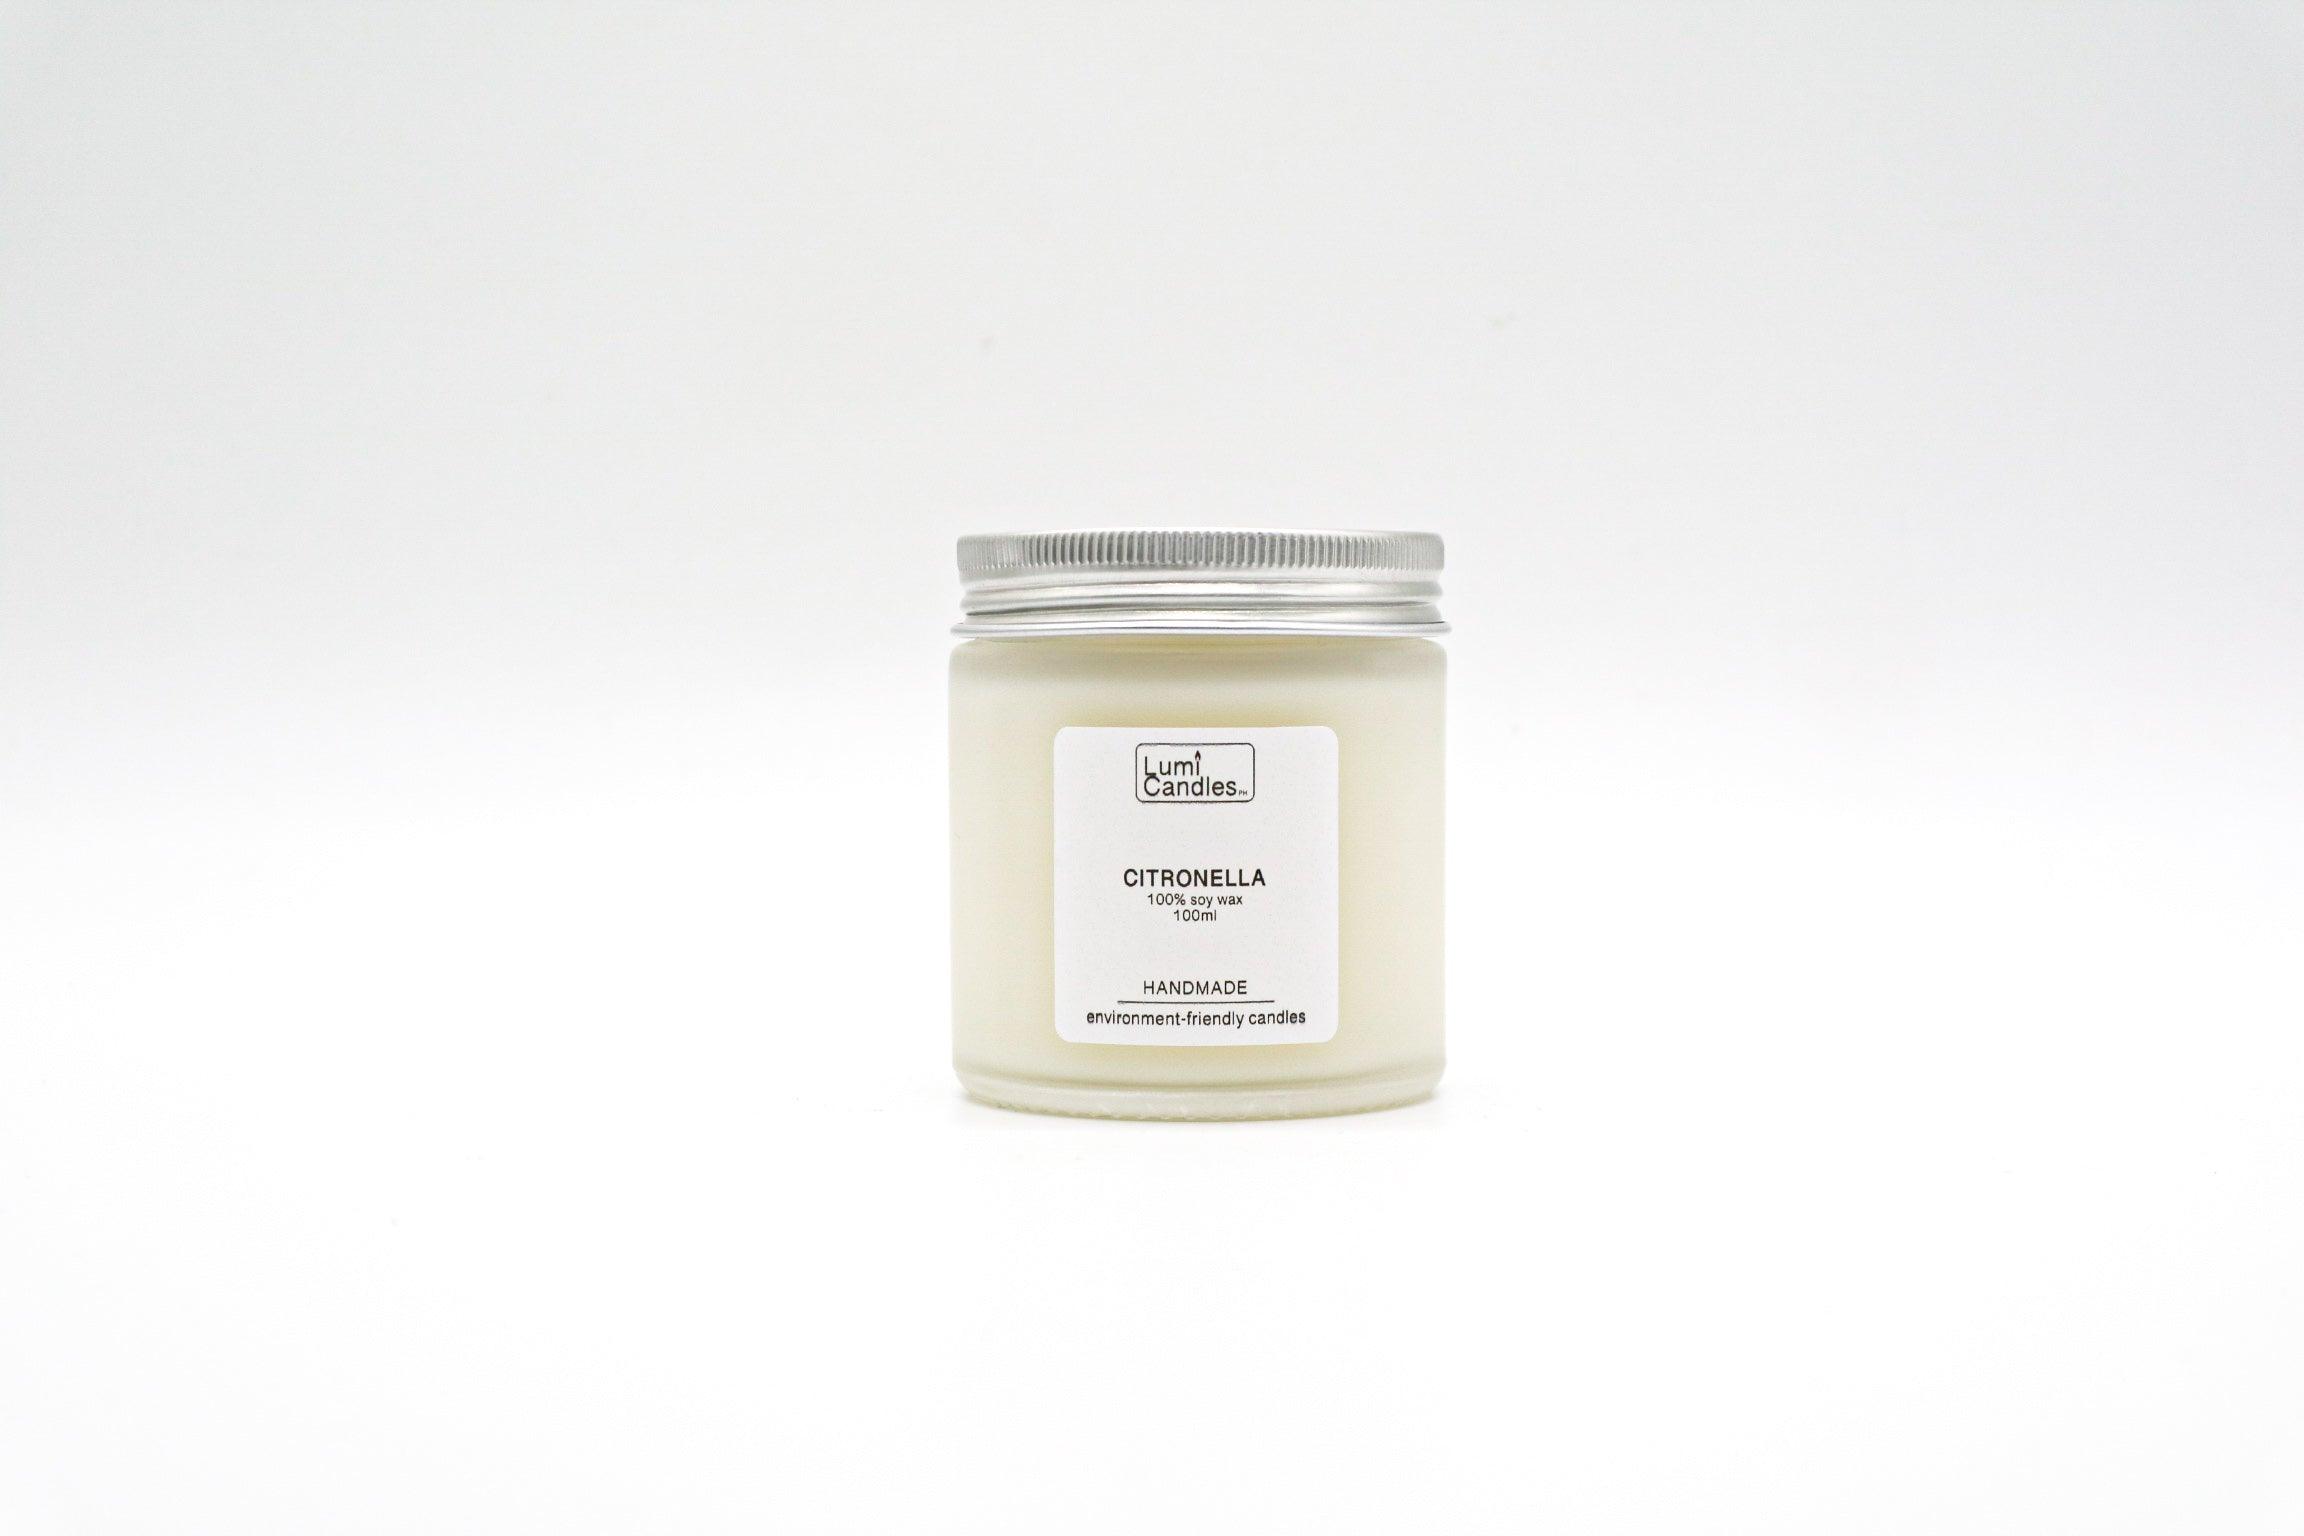 Citronella LUMI soy candle at 100 ML by LUMI Candles PH